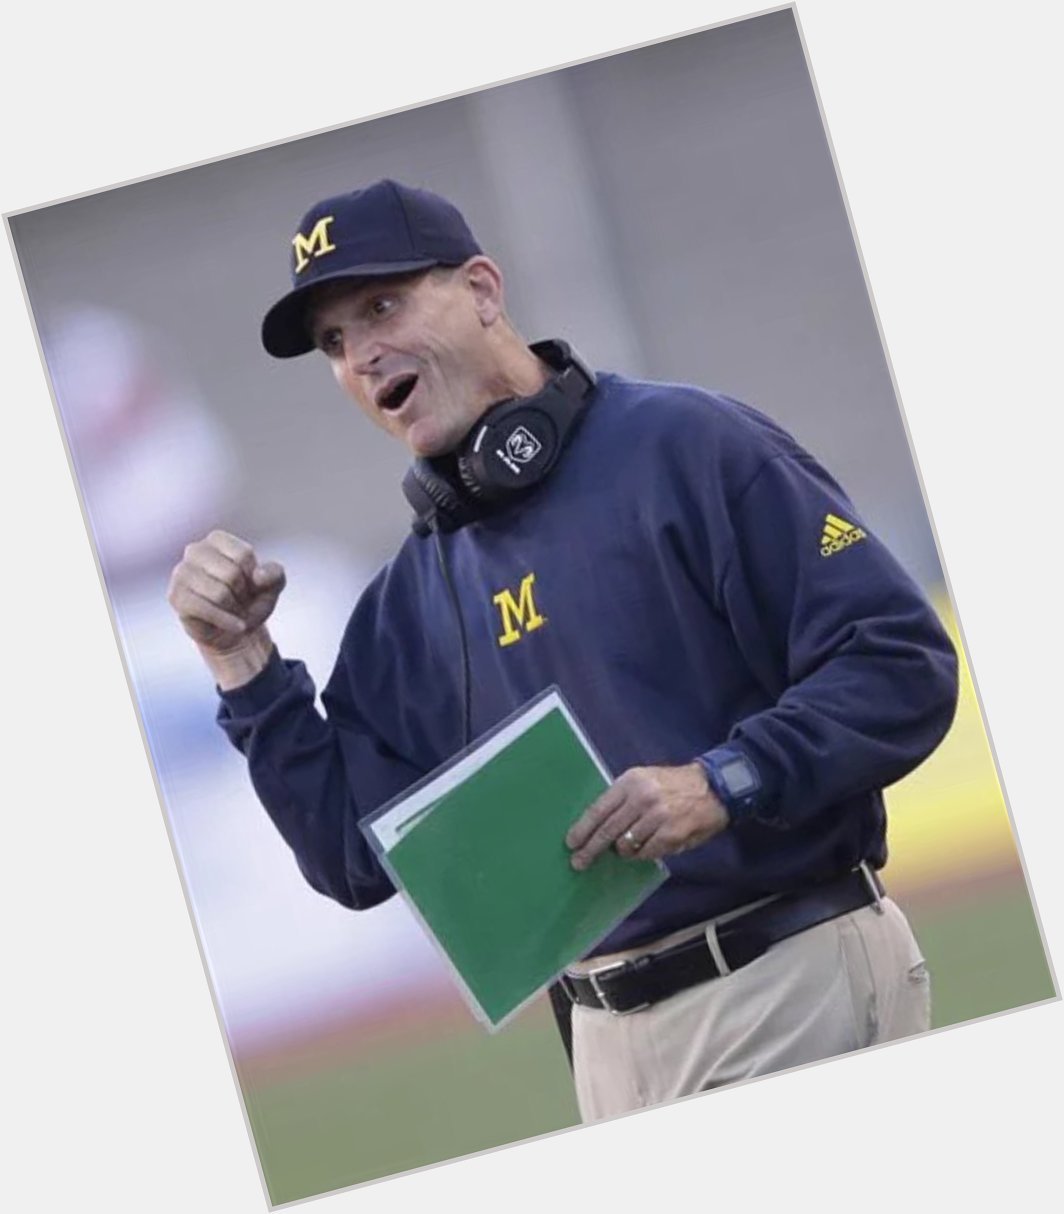 Happy Birthday to the greatest coach on this planet, Jim Harbaugh. GO BLUE 